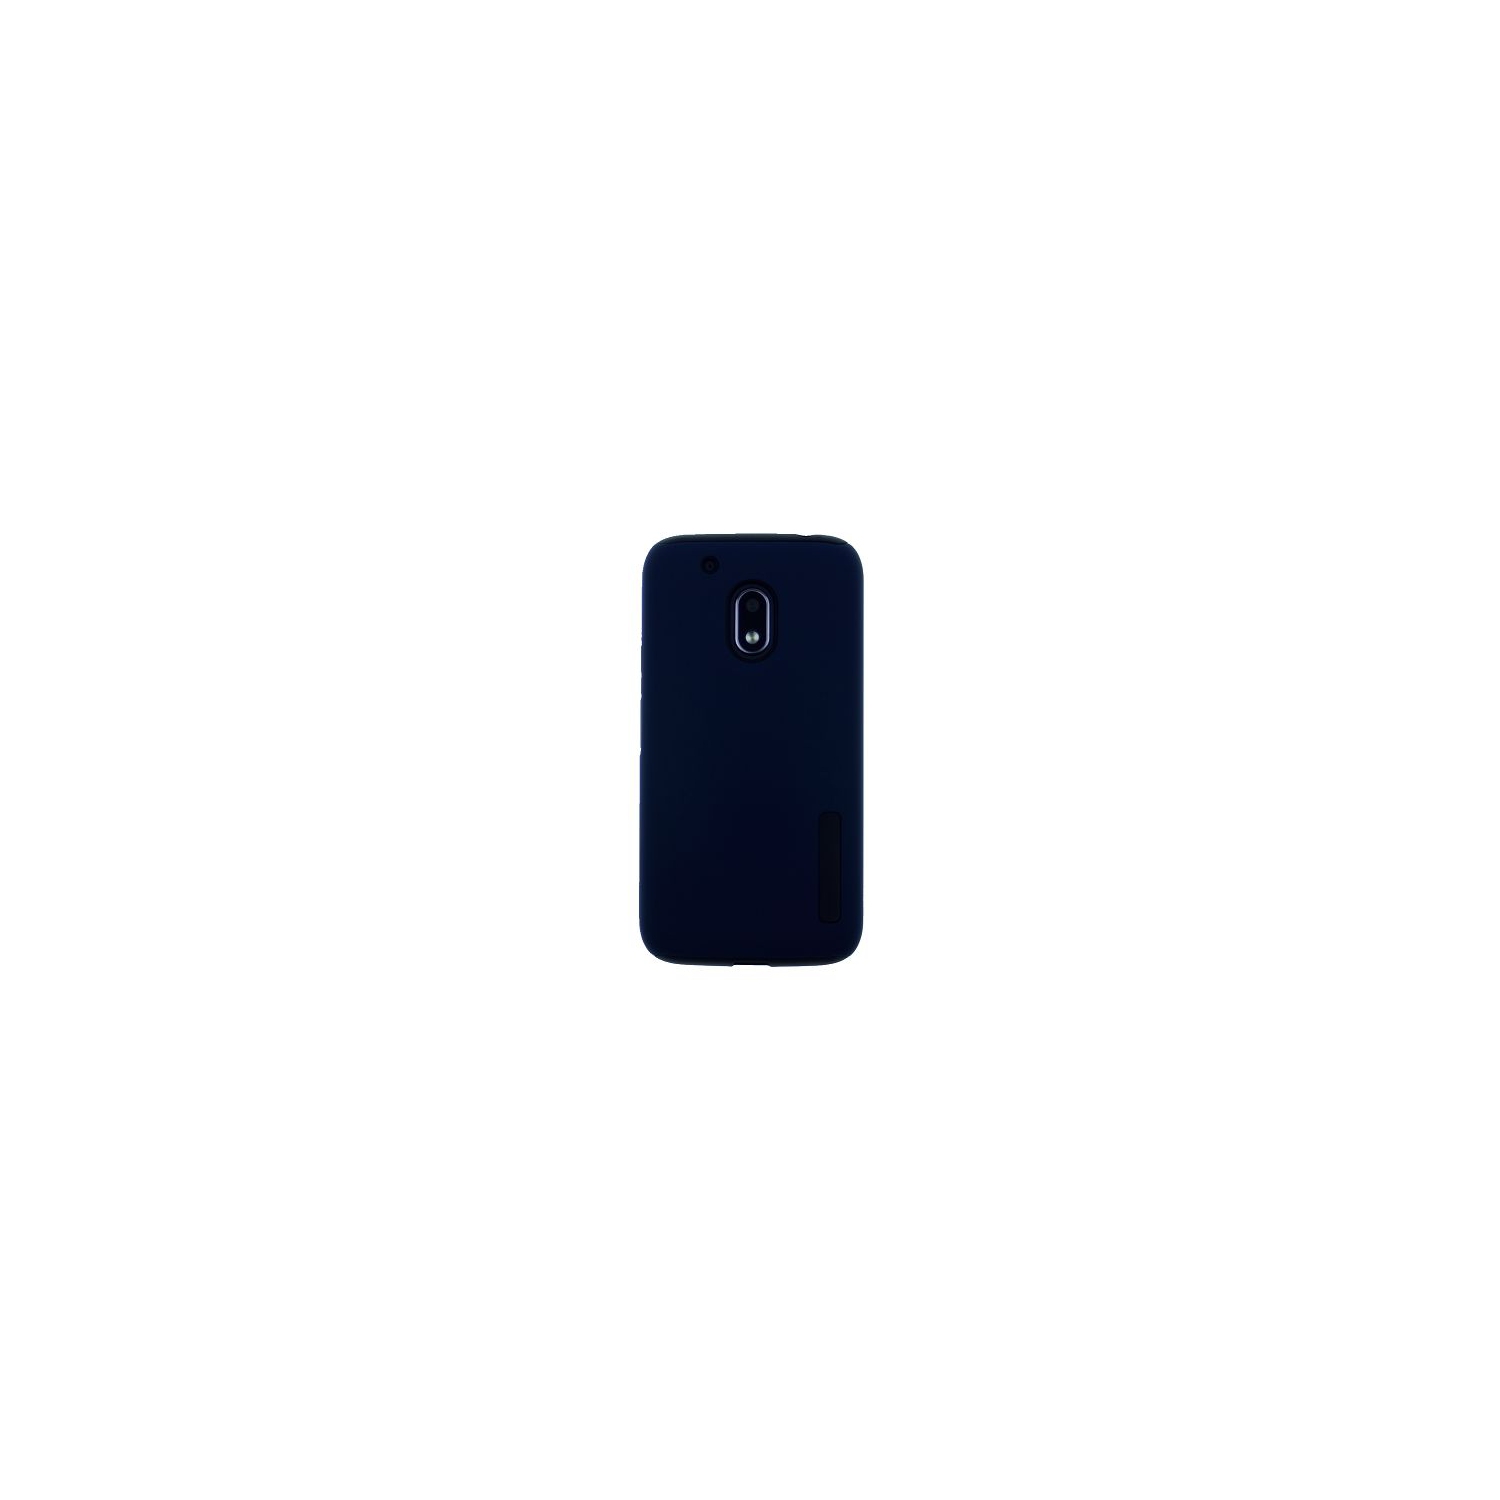 Moto G4 Play Double Layers Hard Case,w/ Smooth Back, Navy Blue